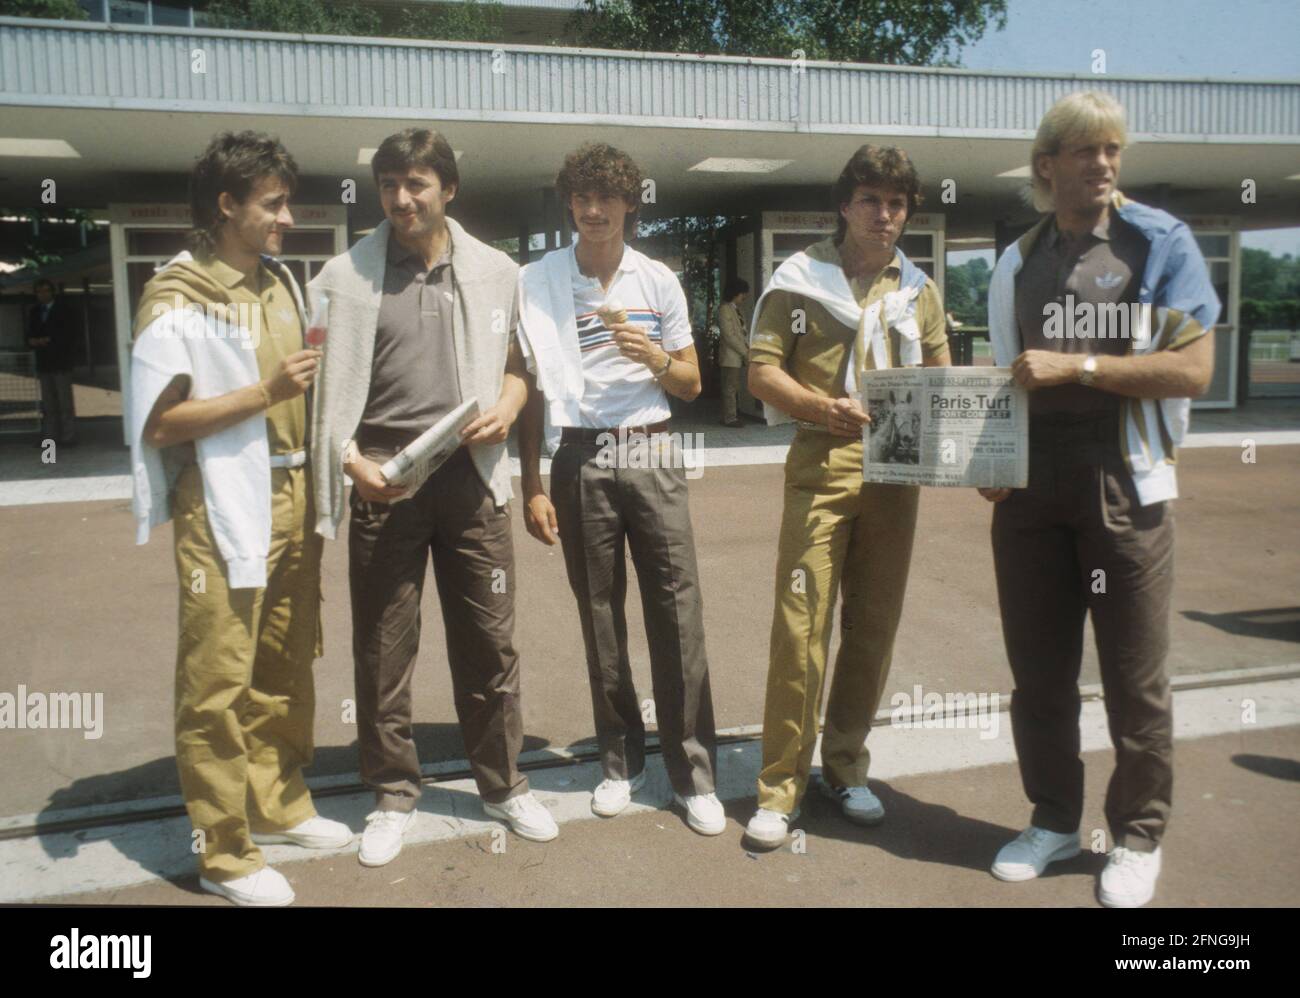 Football European Championship 1984 in France: Outing of the German national players in Paris 09.06.1984 (estimated). From left: Pierre Littbarski, Klaus Allofs, Ralf Falkenmayer, Lothar Matthäus and Hans Günter-Bruns in front of the racecourse. [automated translation] Stock Photo